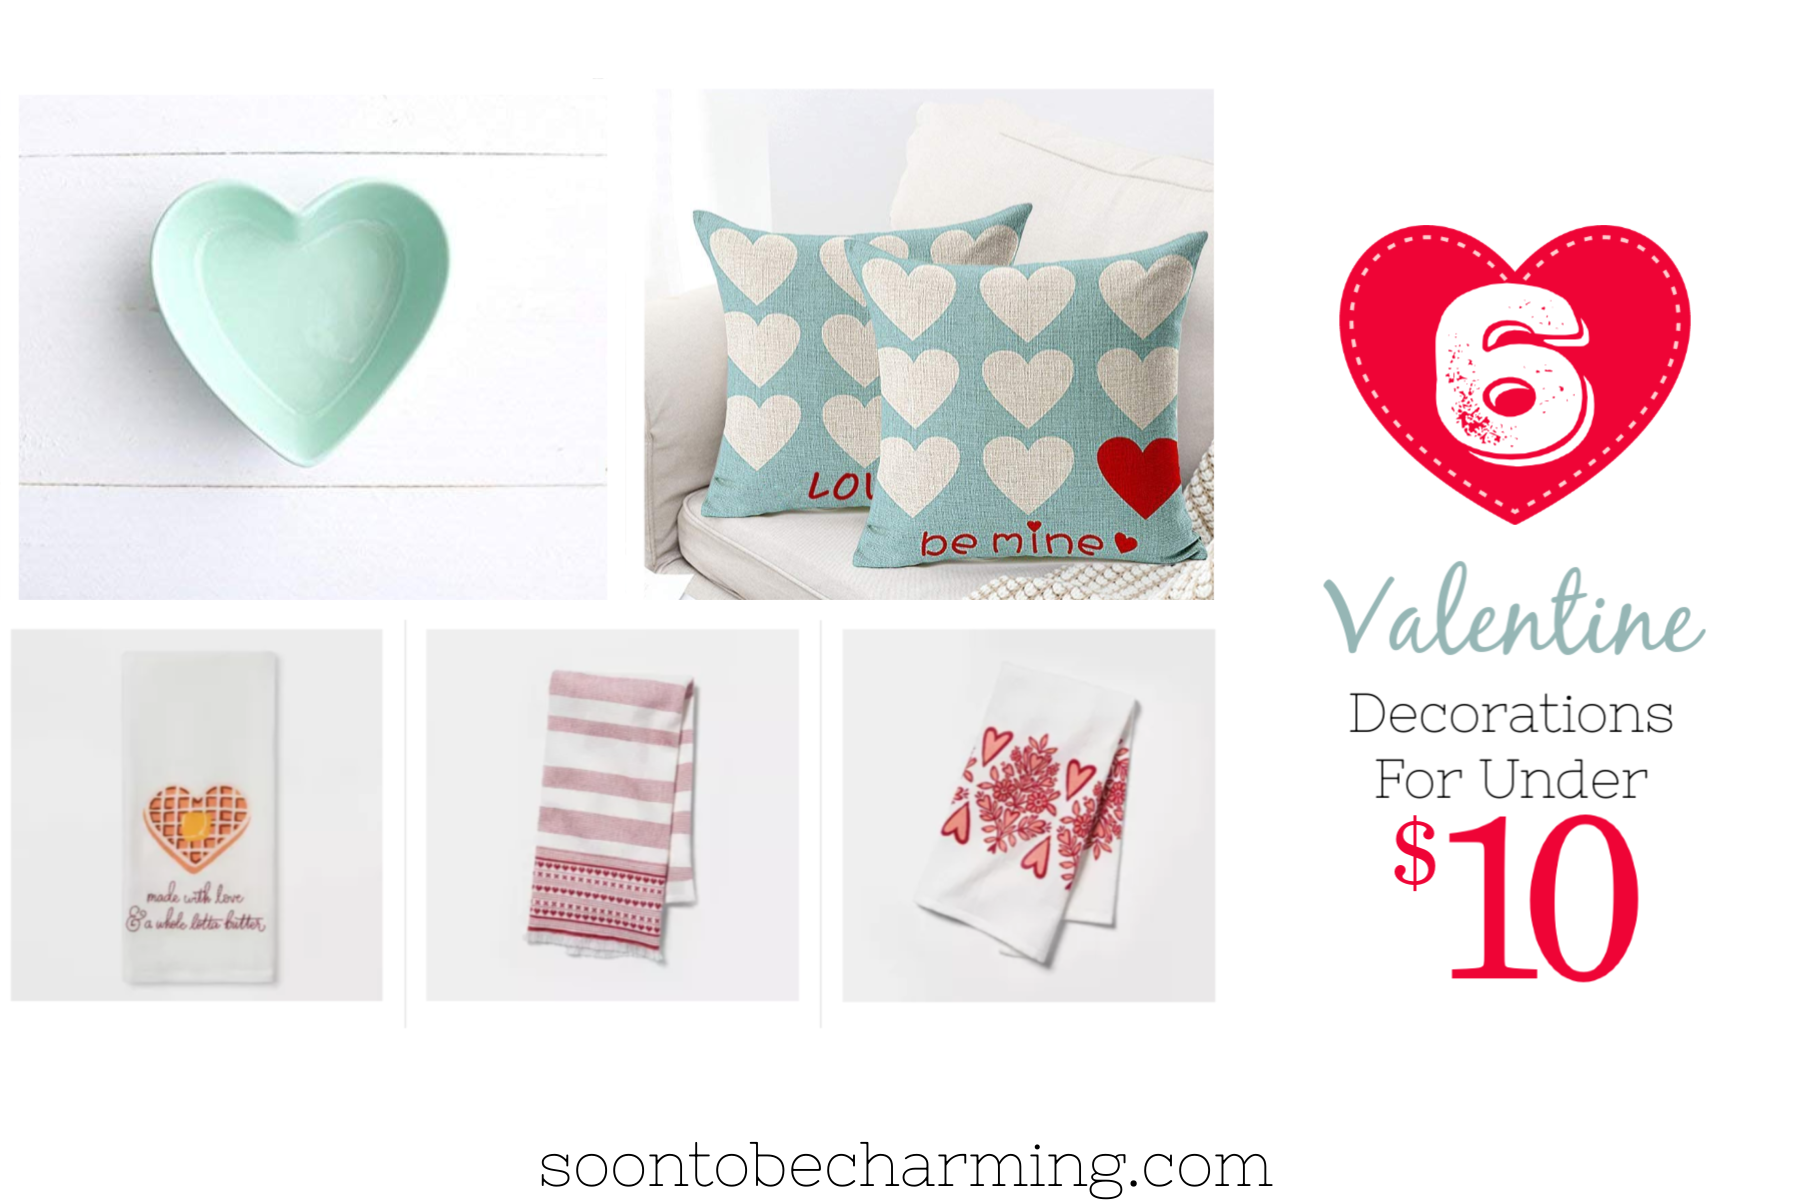 6 Valentine Day Decorations For Under $10